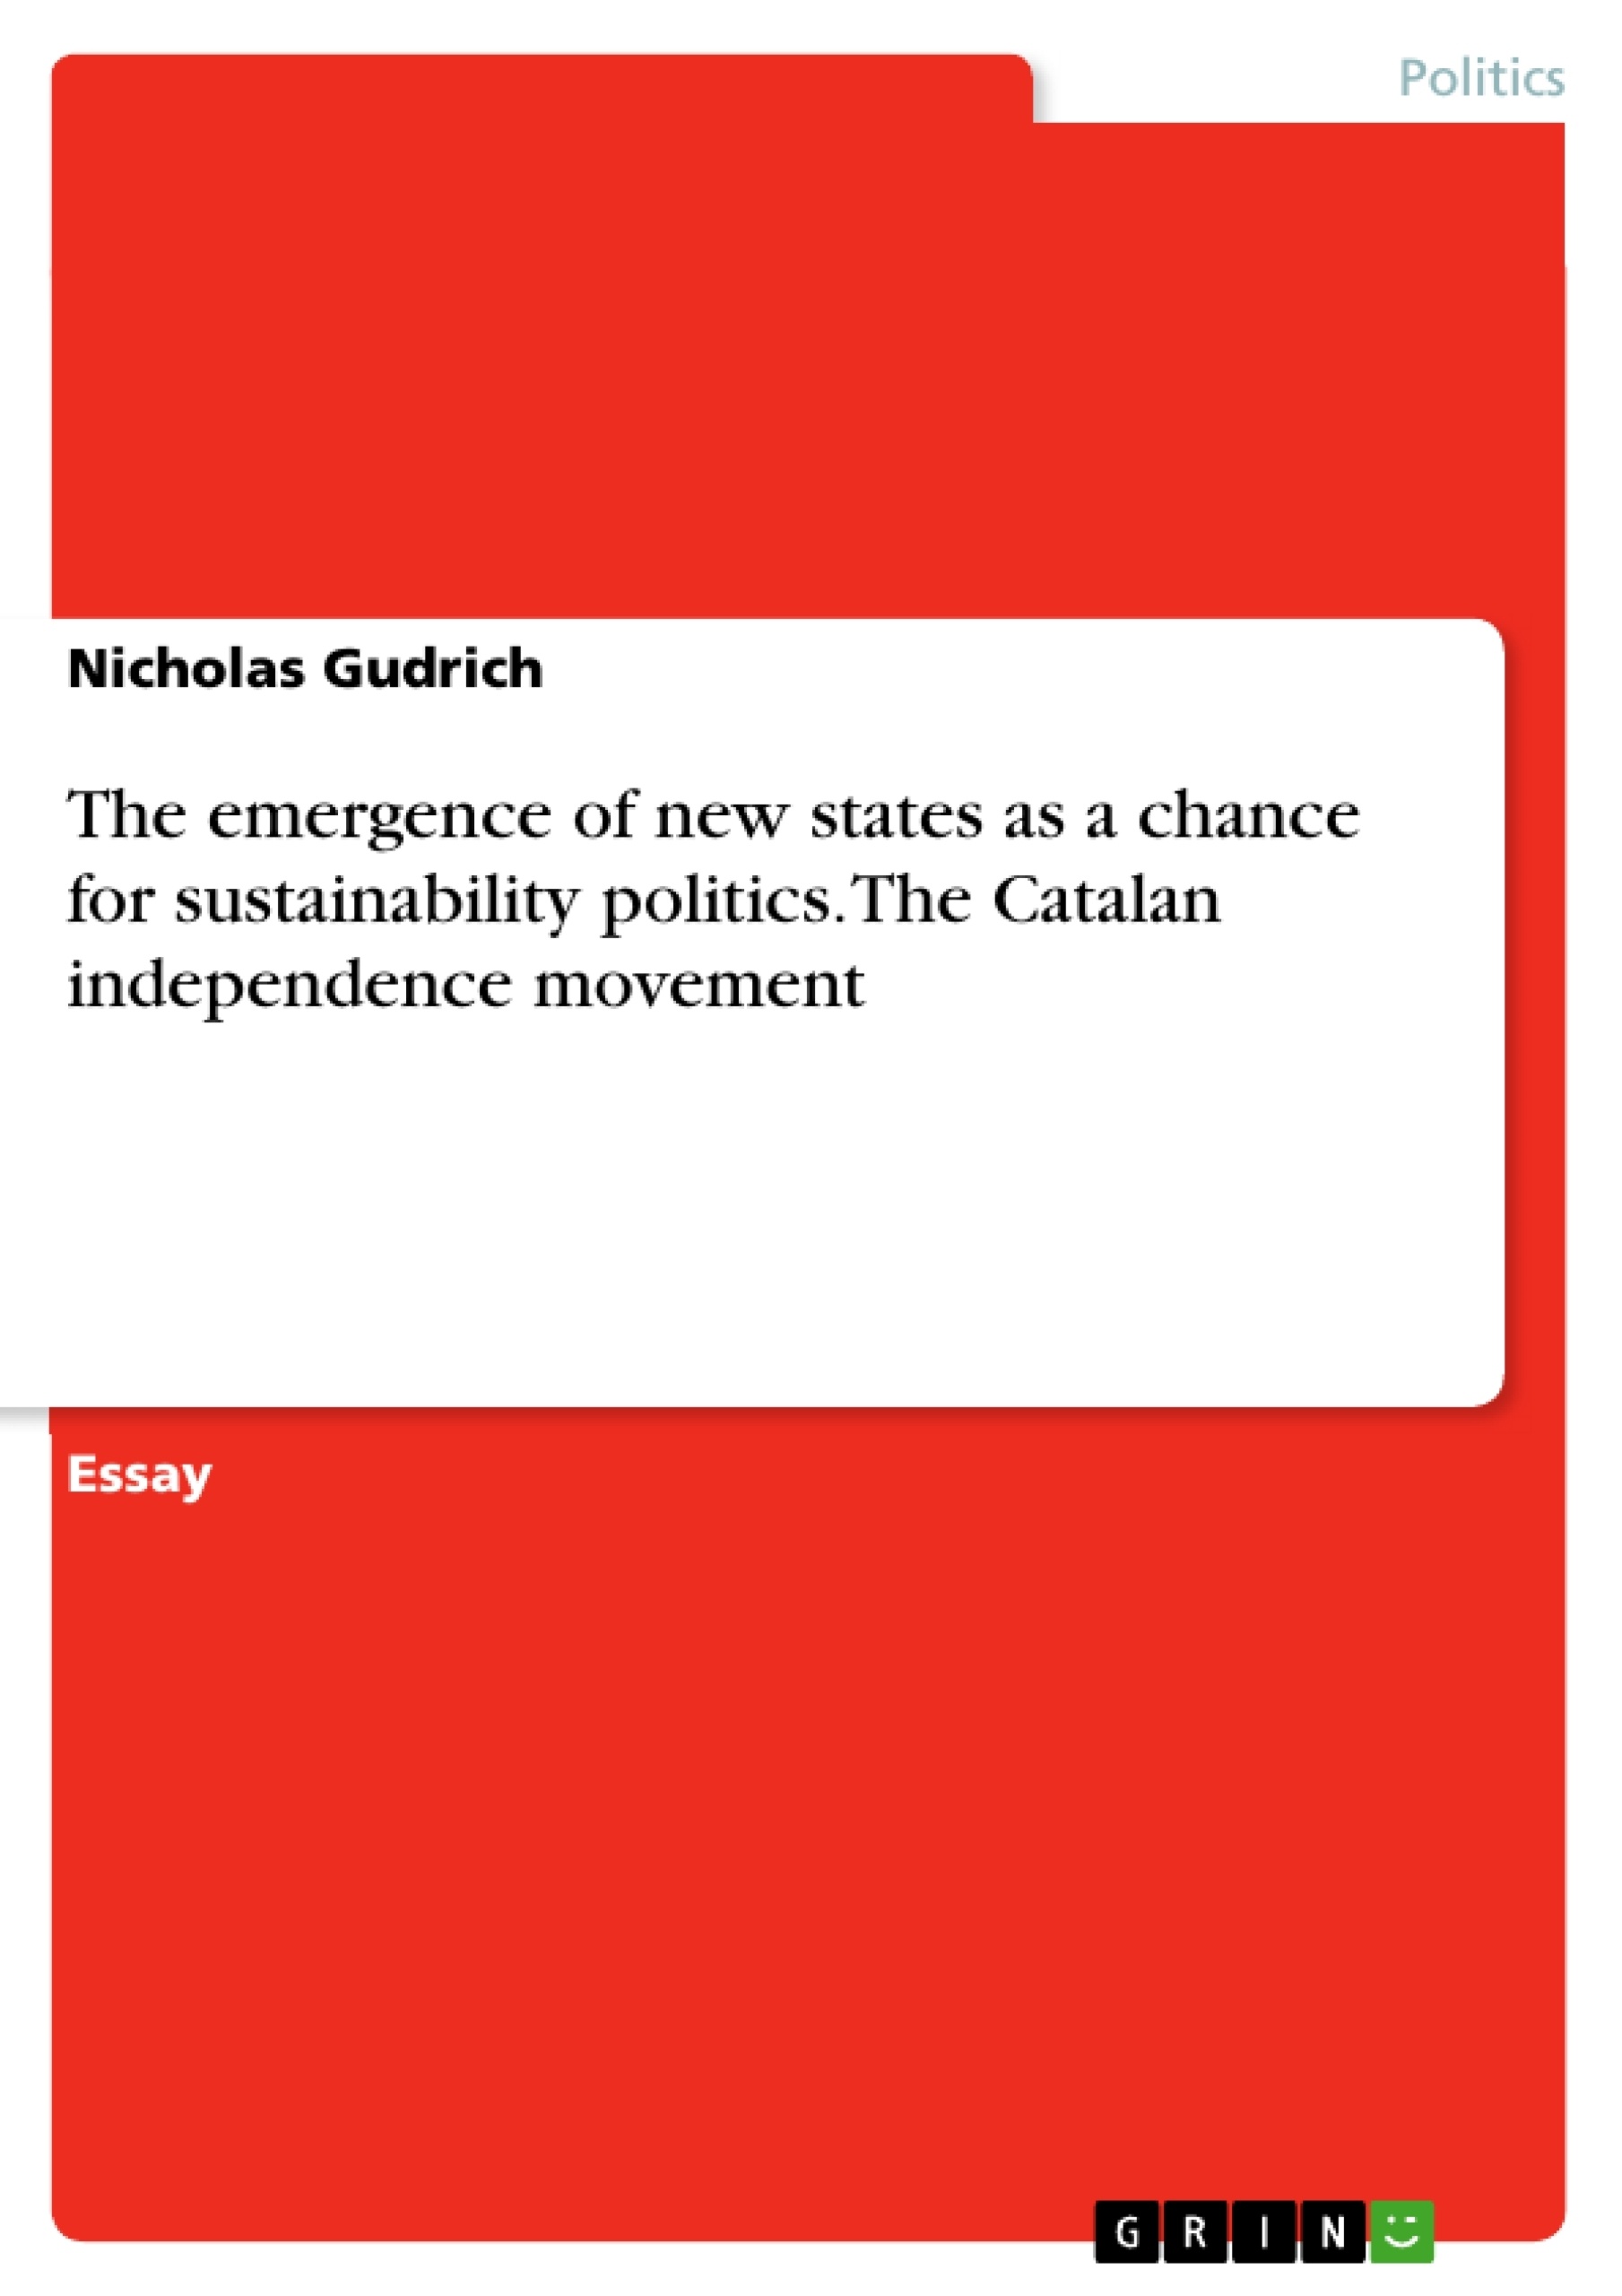 Título: The emergence of new states as a chance for sustainability politics. The Catalan independence movement